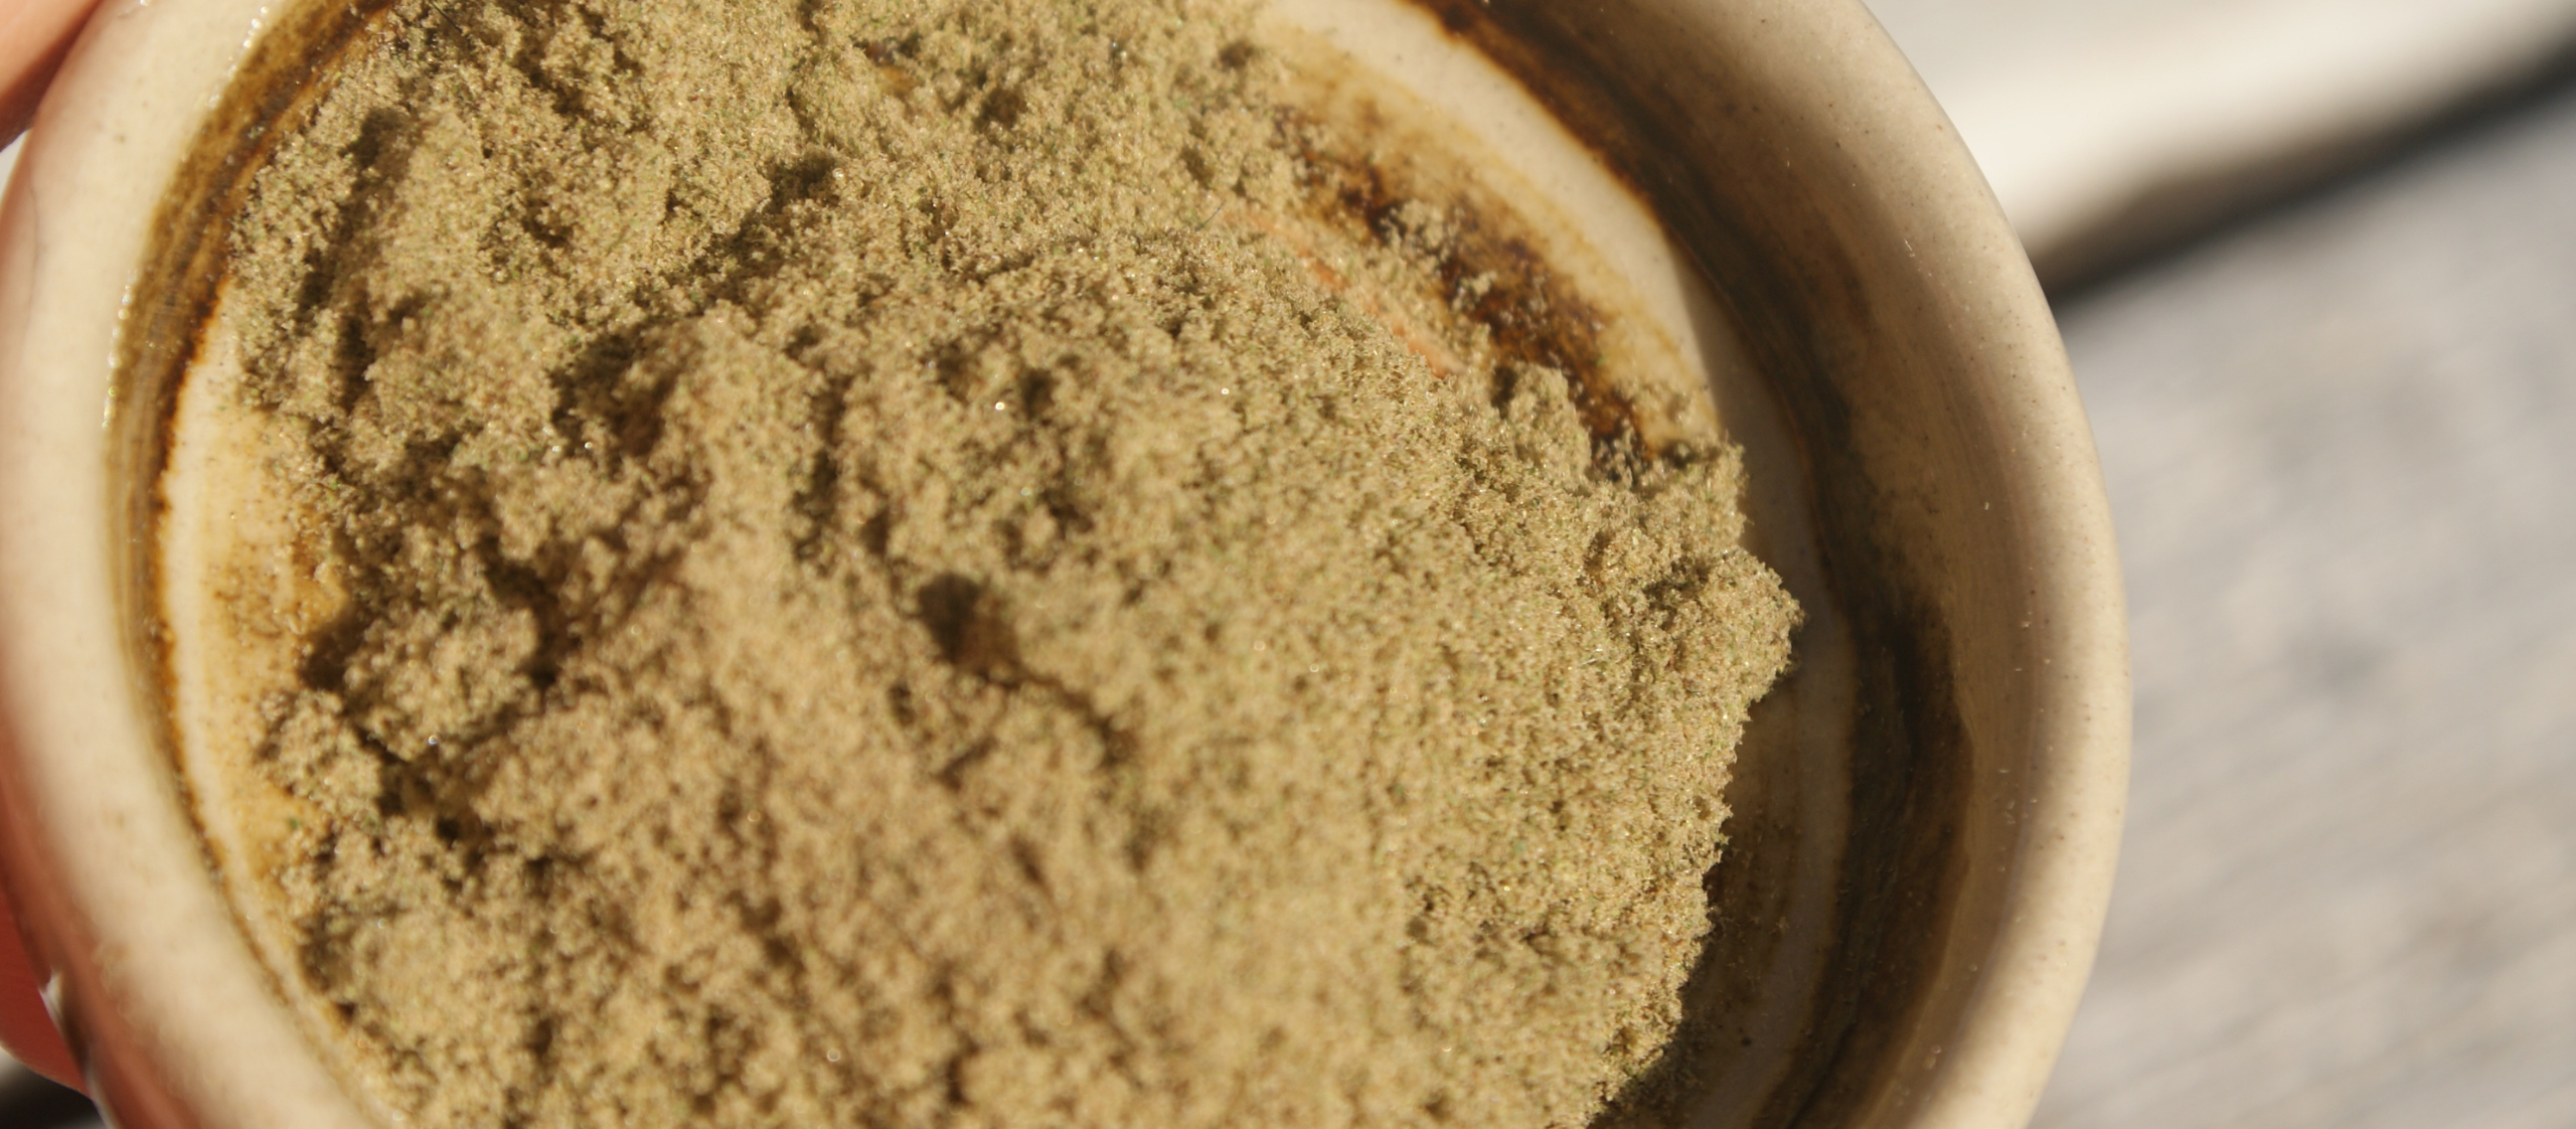 Does this kief look right